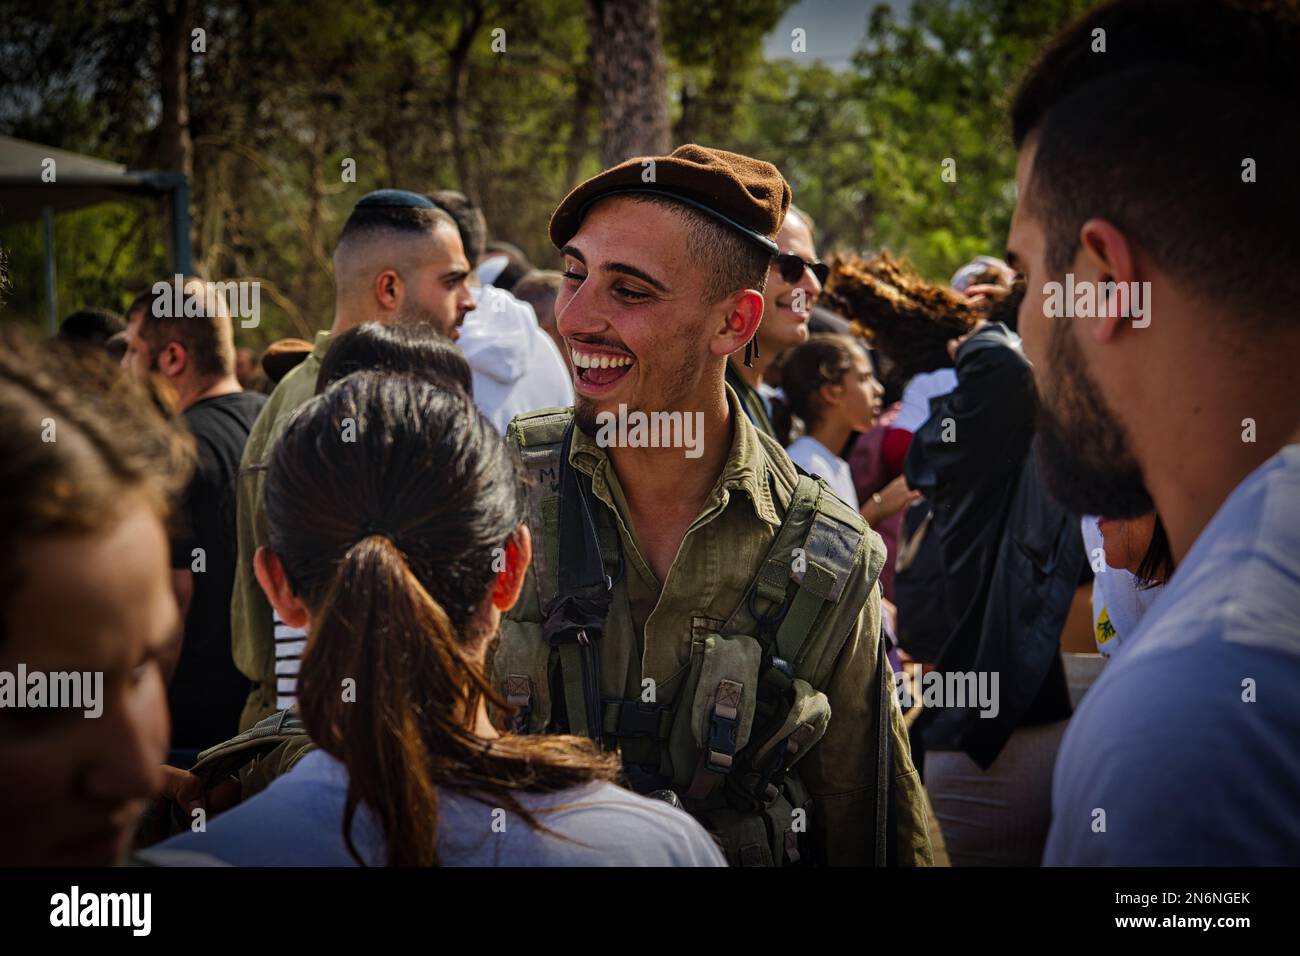 A Golani soldier smiling in uniform during an army ceremony in Israel Stock Photo